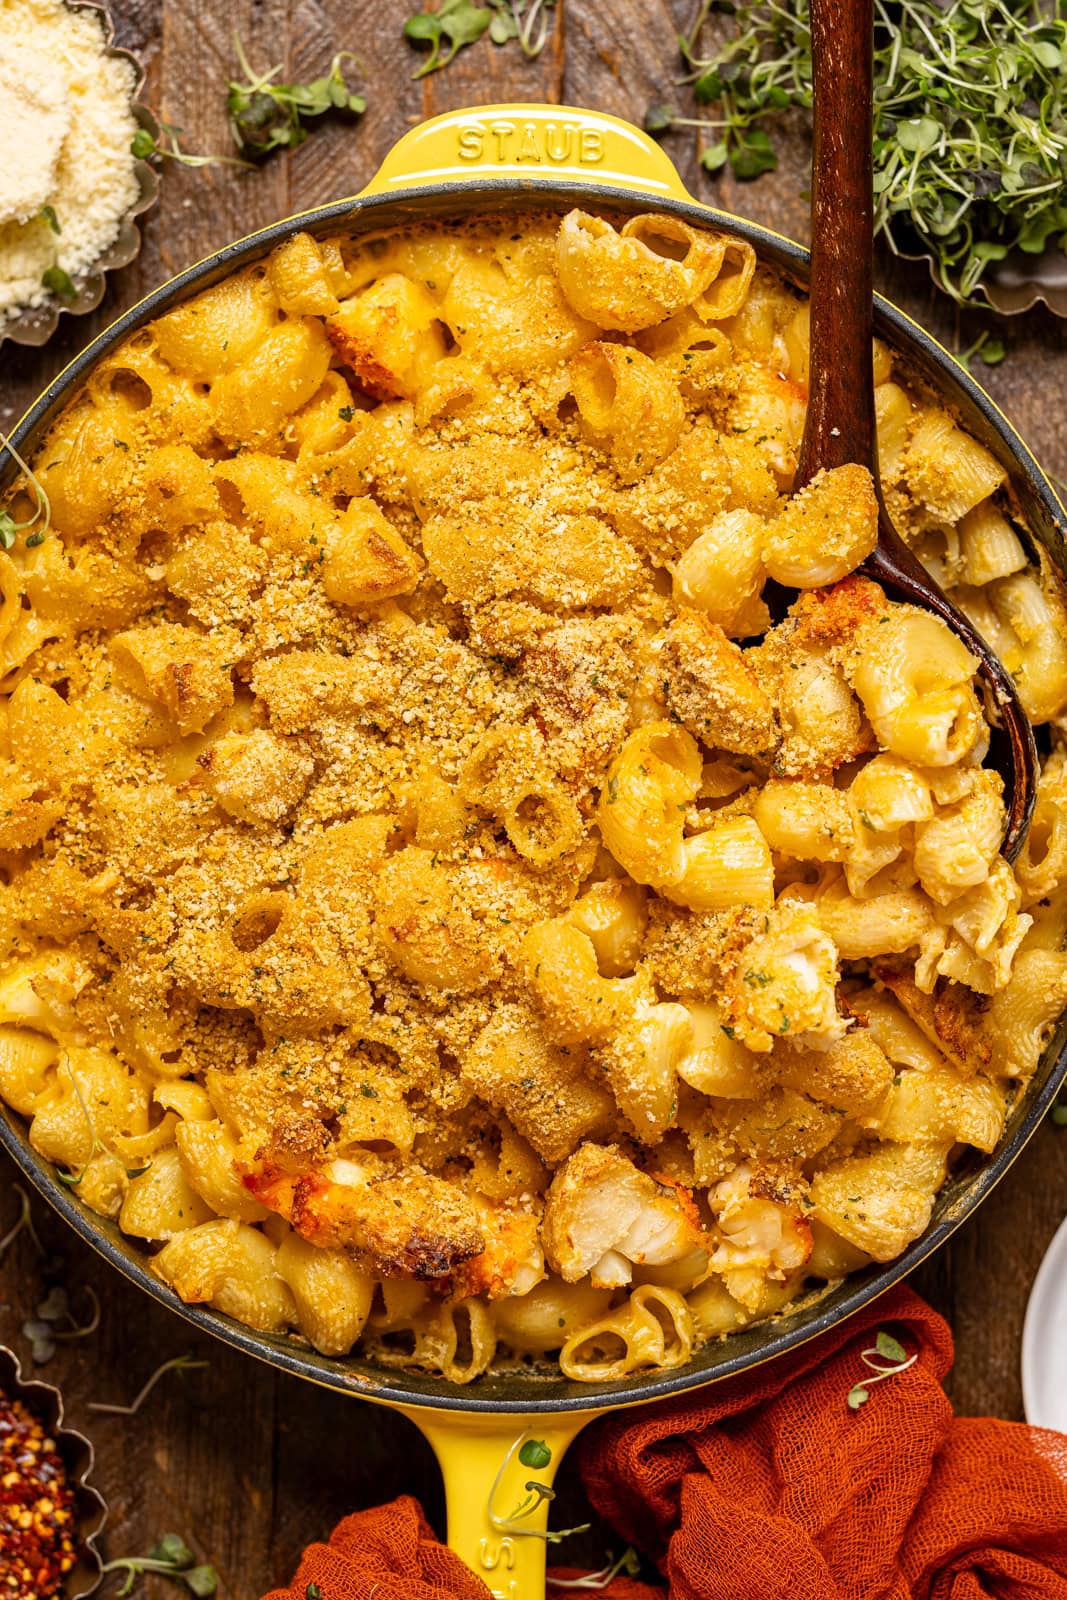 Baked lobster mac and cheese in a yellow skillet with a wooden spoon.